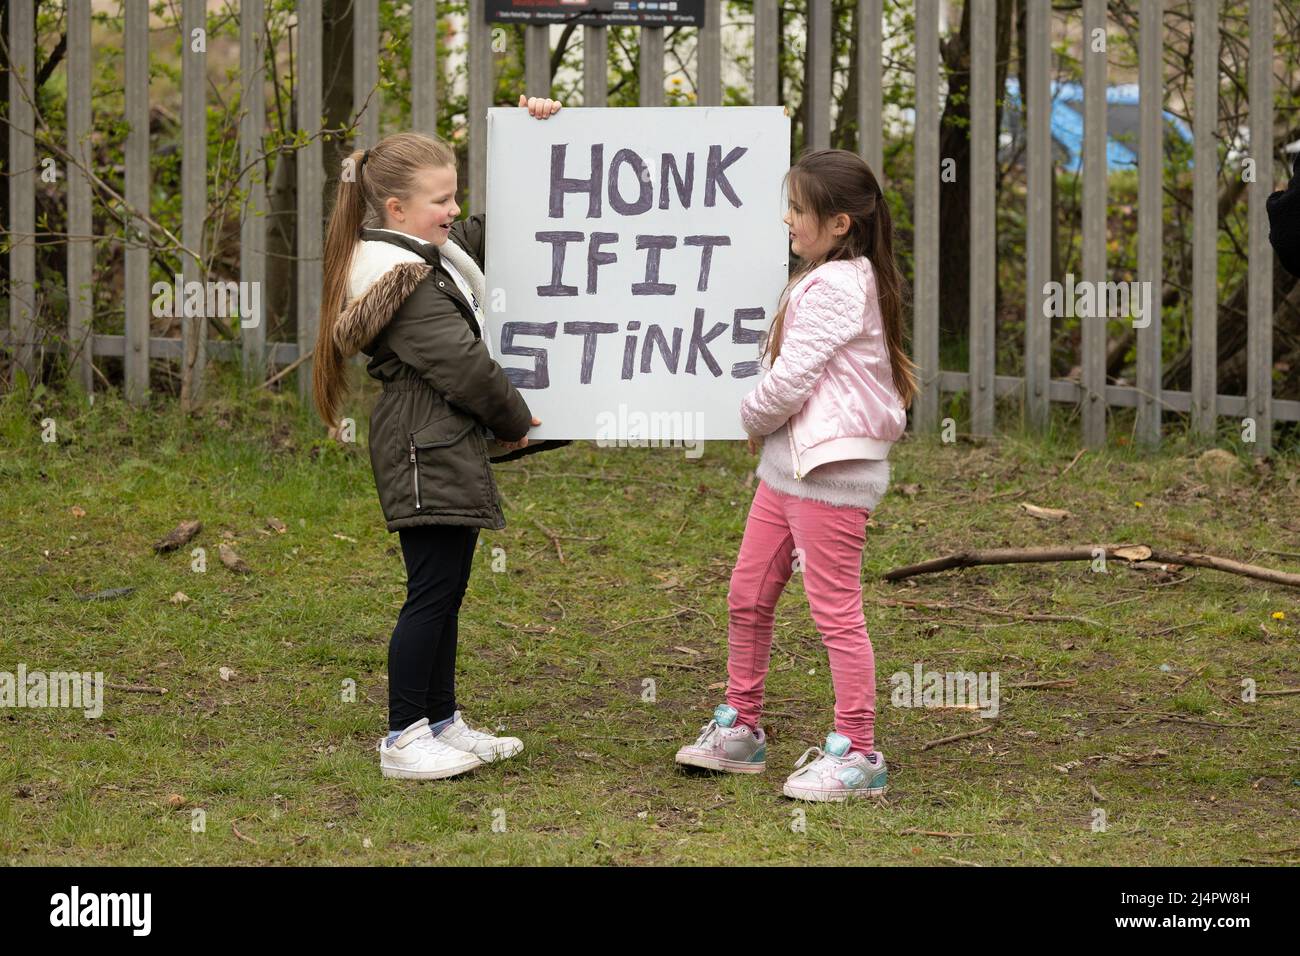 children holding banners protesting outside of walleys quarry waste landfill site Silverdale ,Staffordshire .Stop the stink campaign Stock Photo